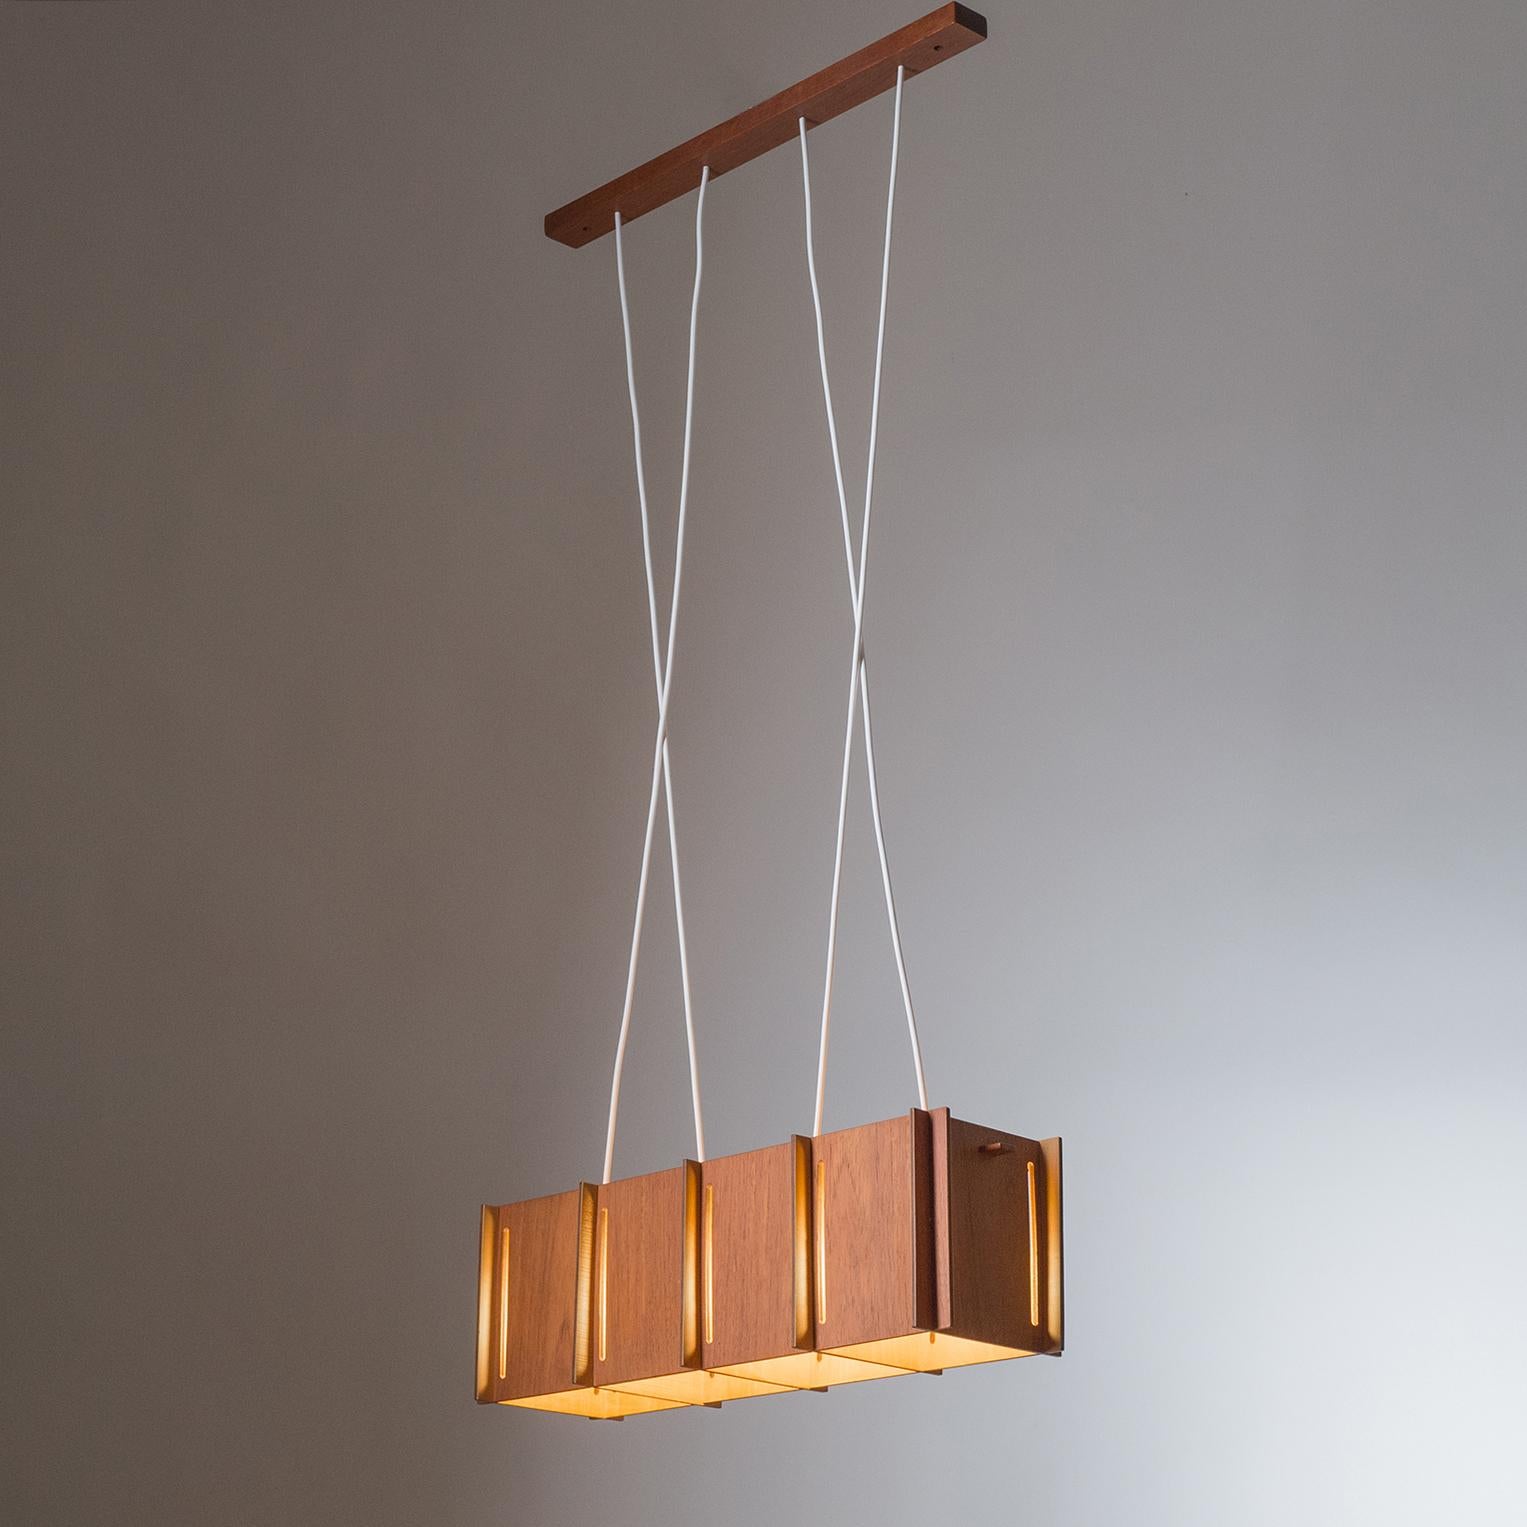 Rare Scandinavian Teak suspension chandelier from the 1950-1960s. Four original bakelite E27 sockets. Drop height adjustable up to a maximum of 45inches/115cm. Height of body is 6.7inches/17cm.